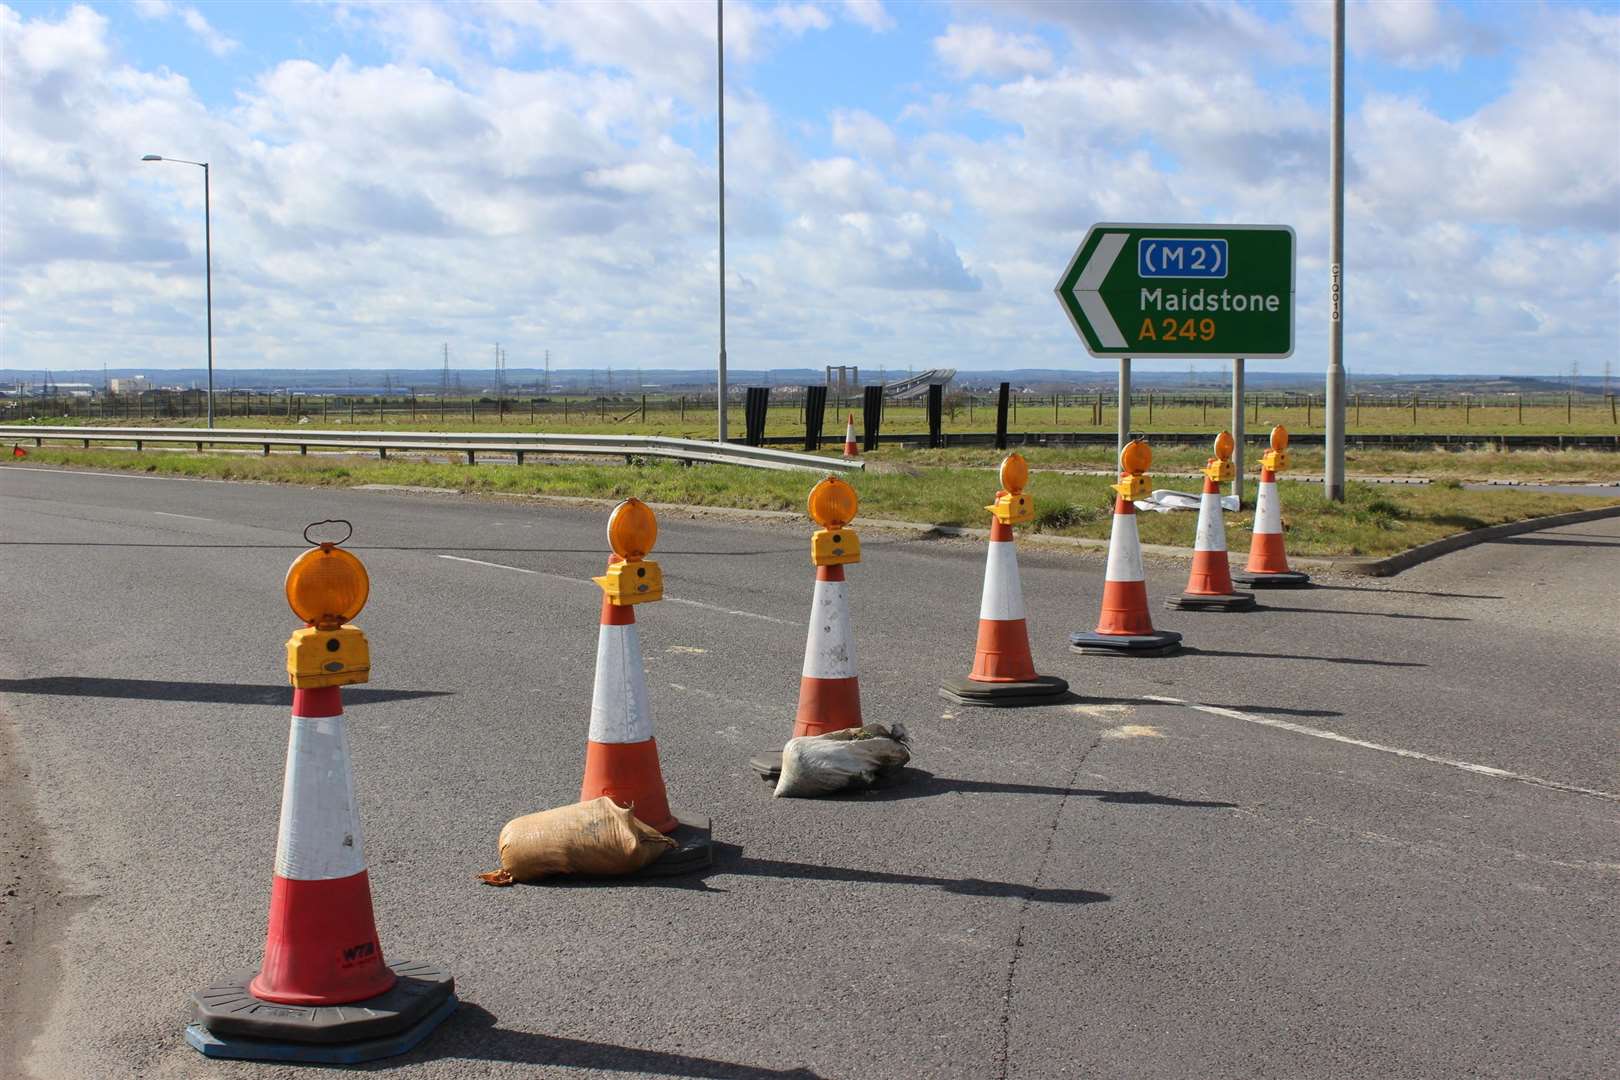 The Sheppey Crossing was closed to traffic earlier today